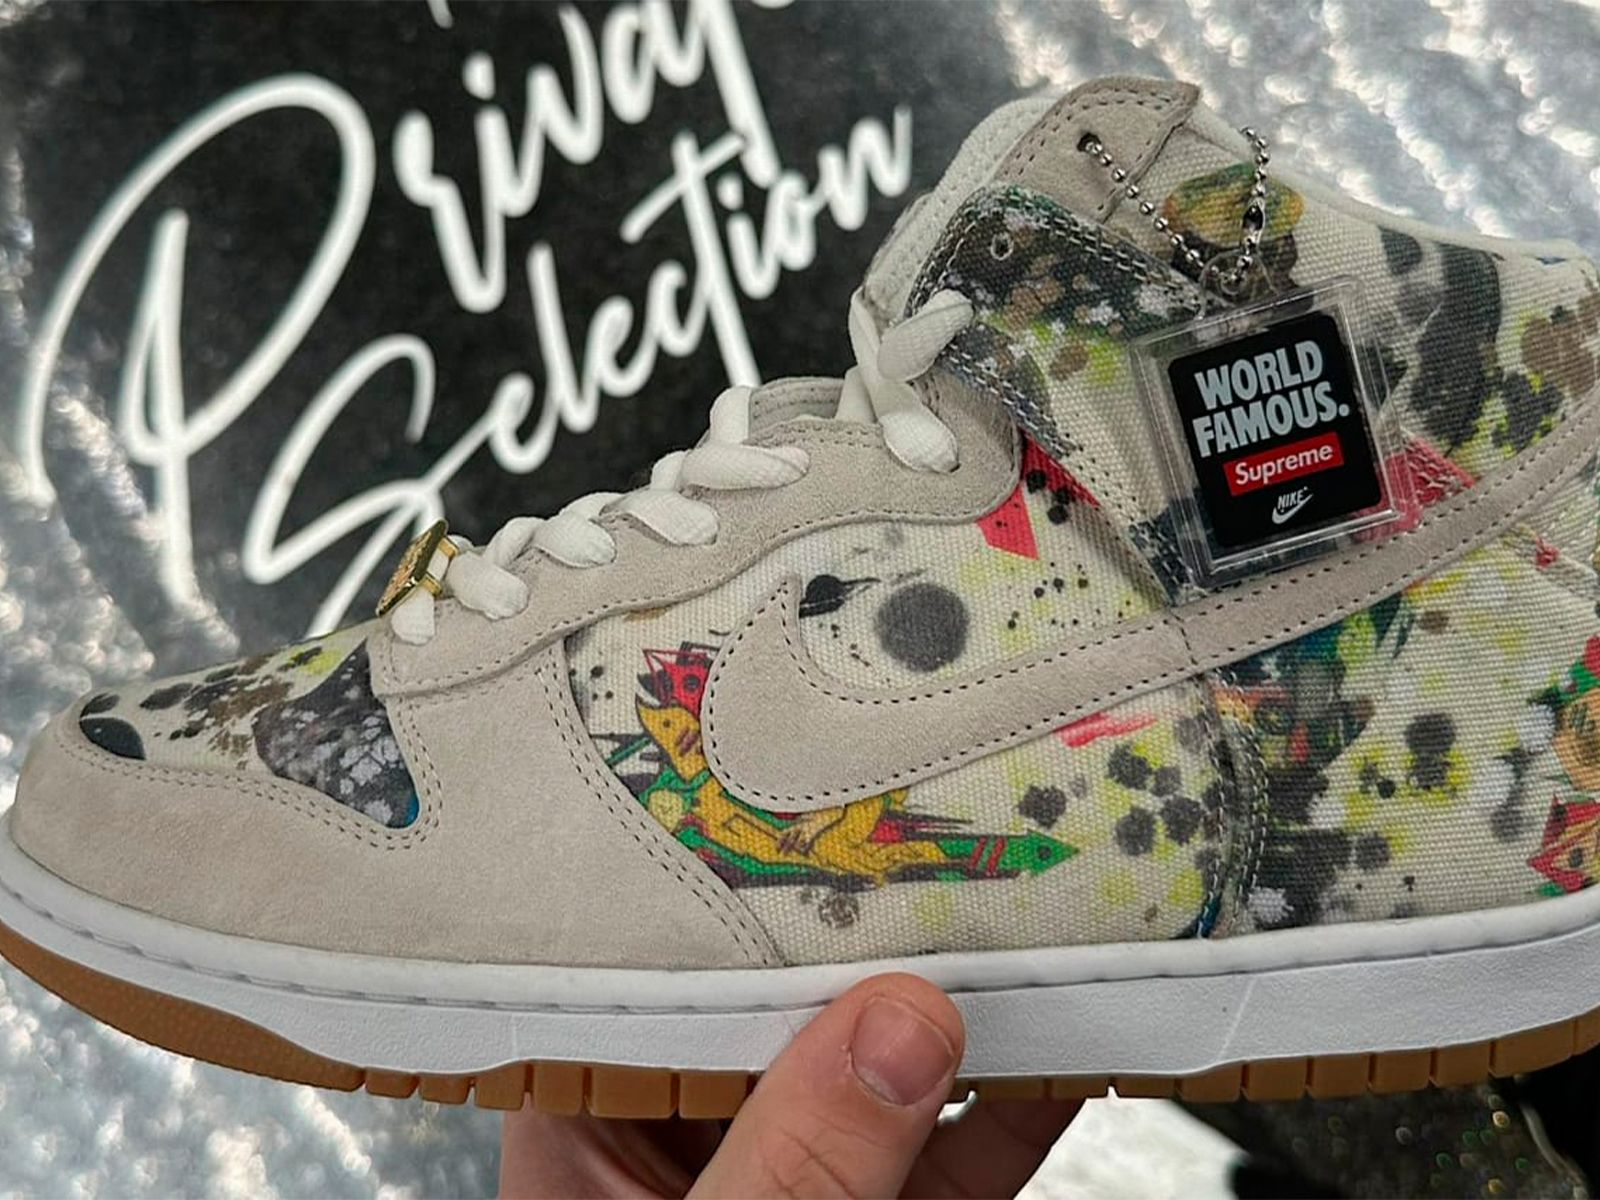 First images of the Supreme x Nike SB Dunk High Rammellzee are leaked